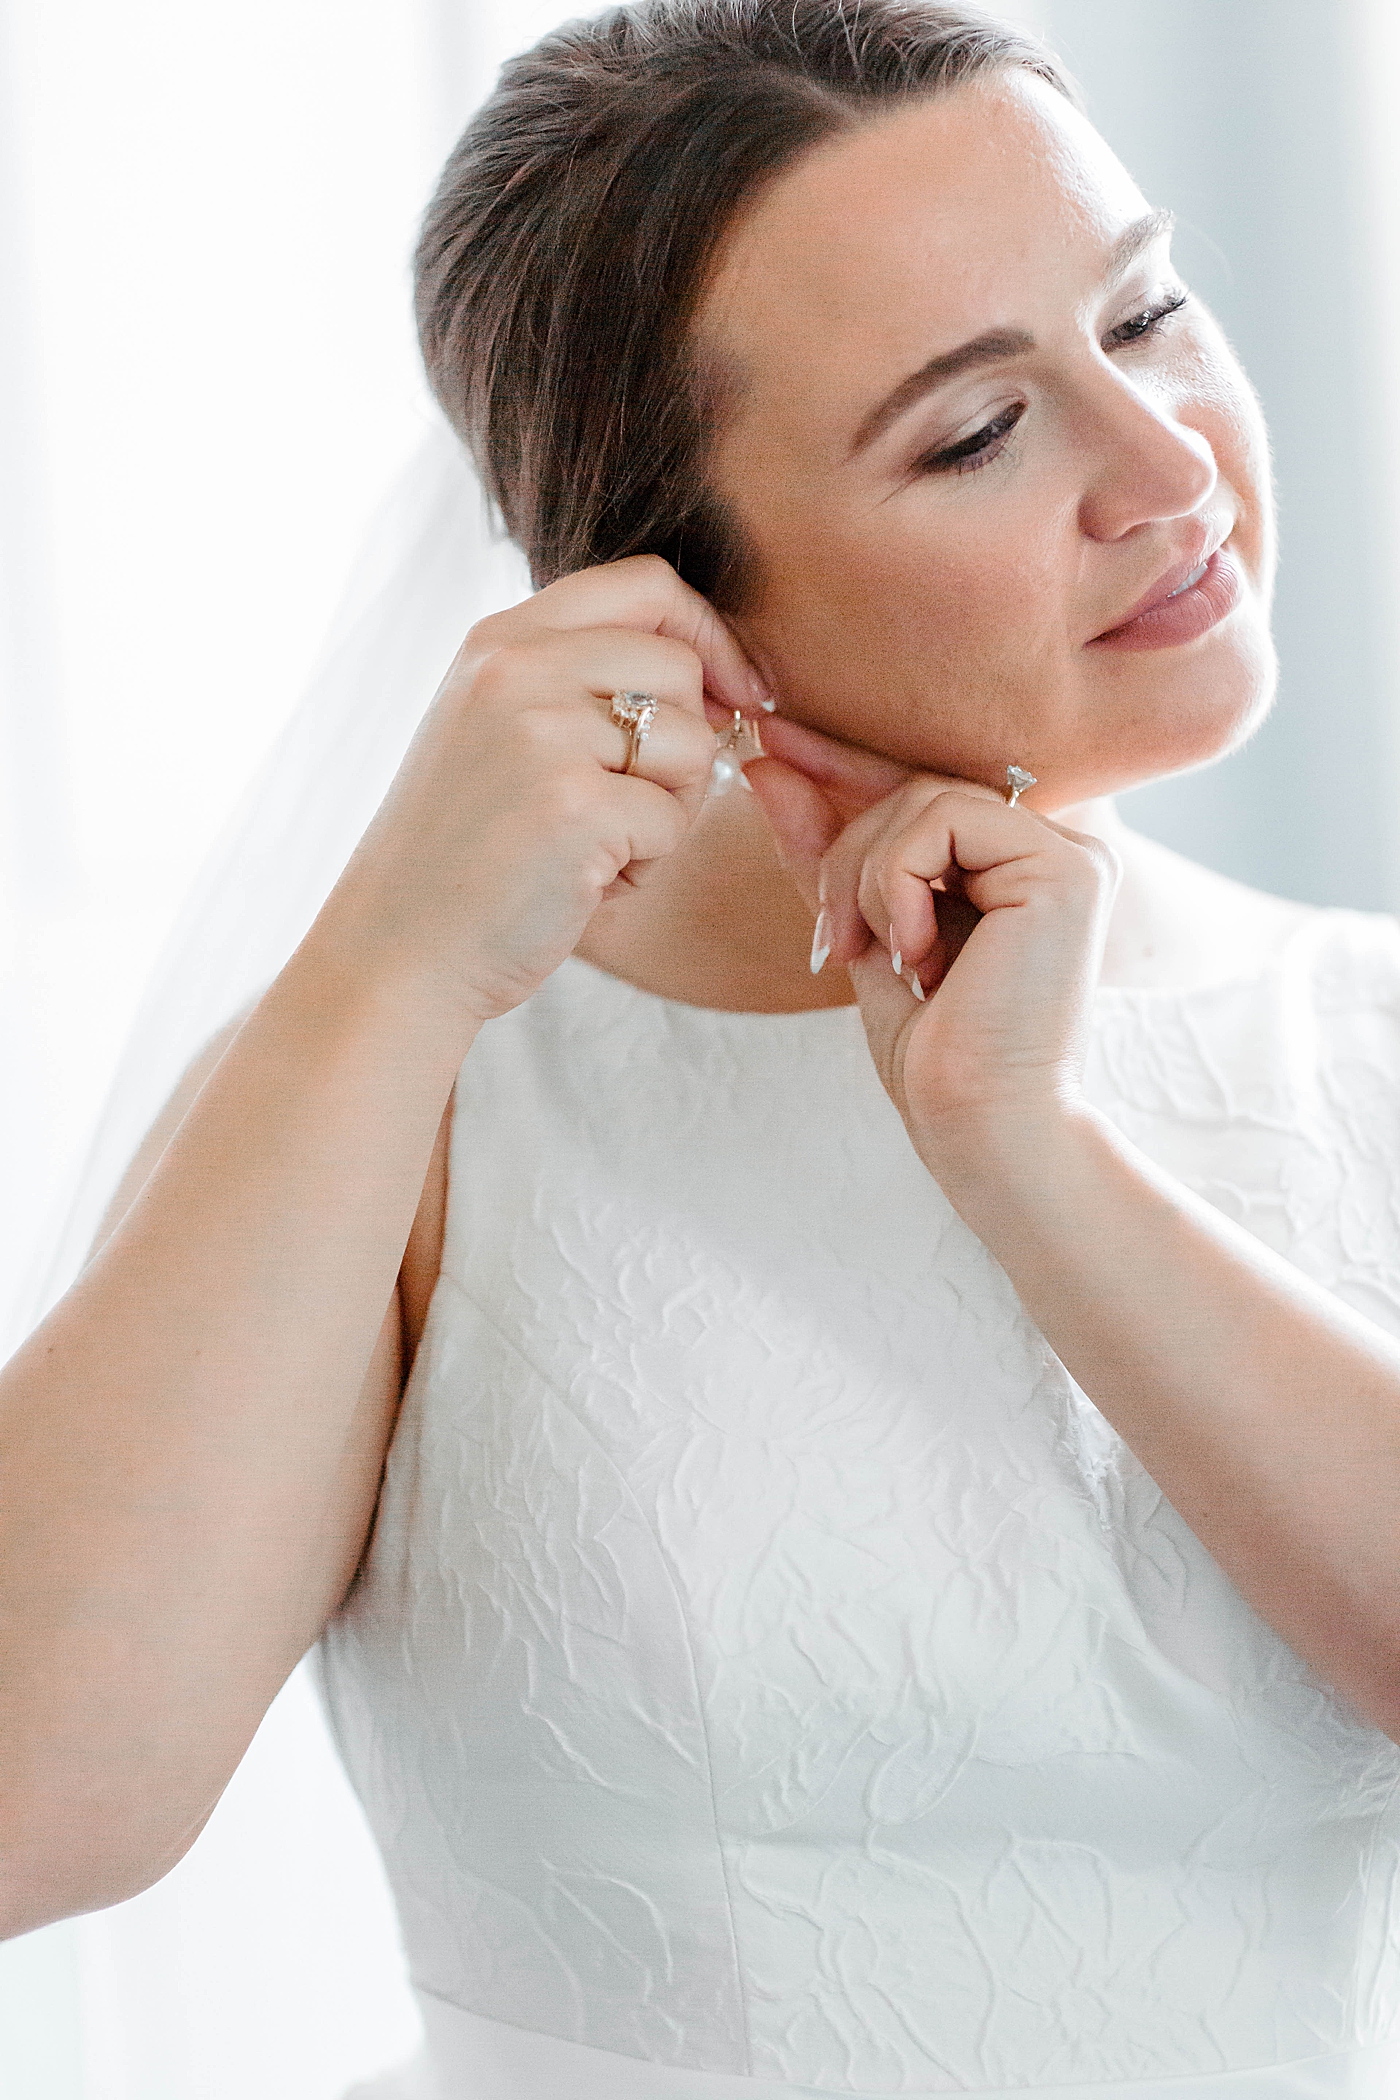 Bride putting in her earrings | Carters Event Co